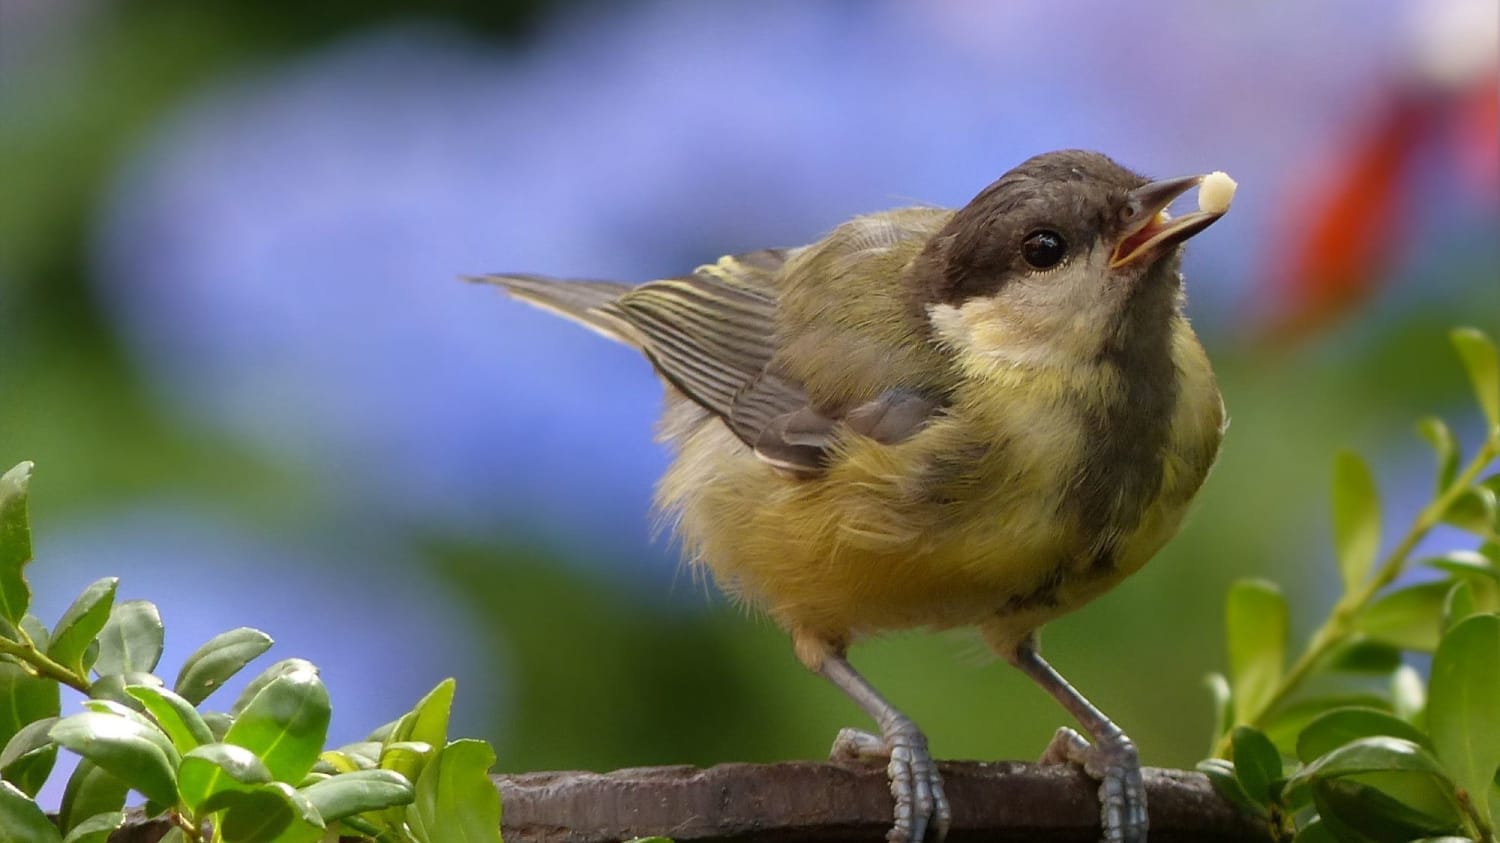 Watch Birds As They Snatch Food in Slow Motion